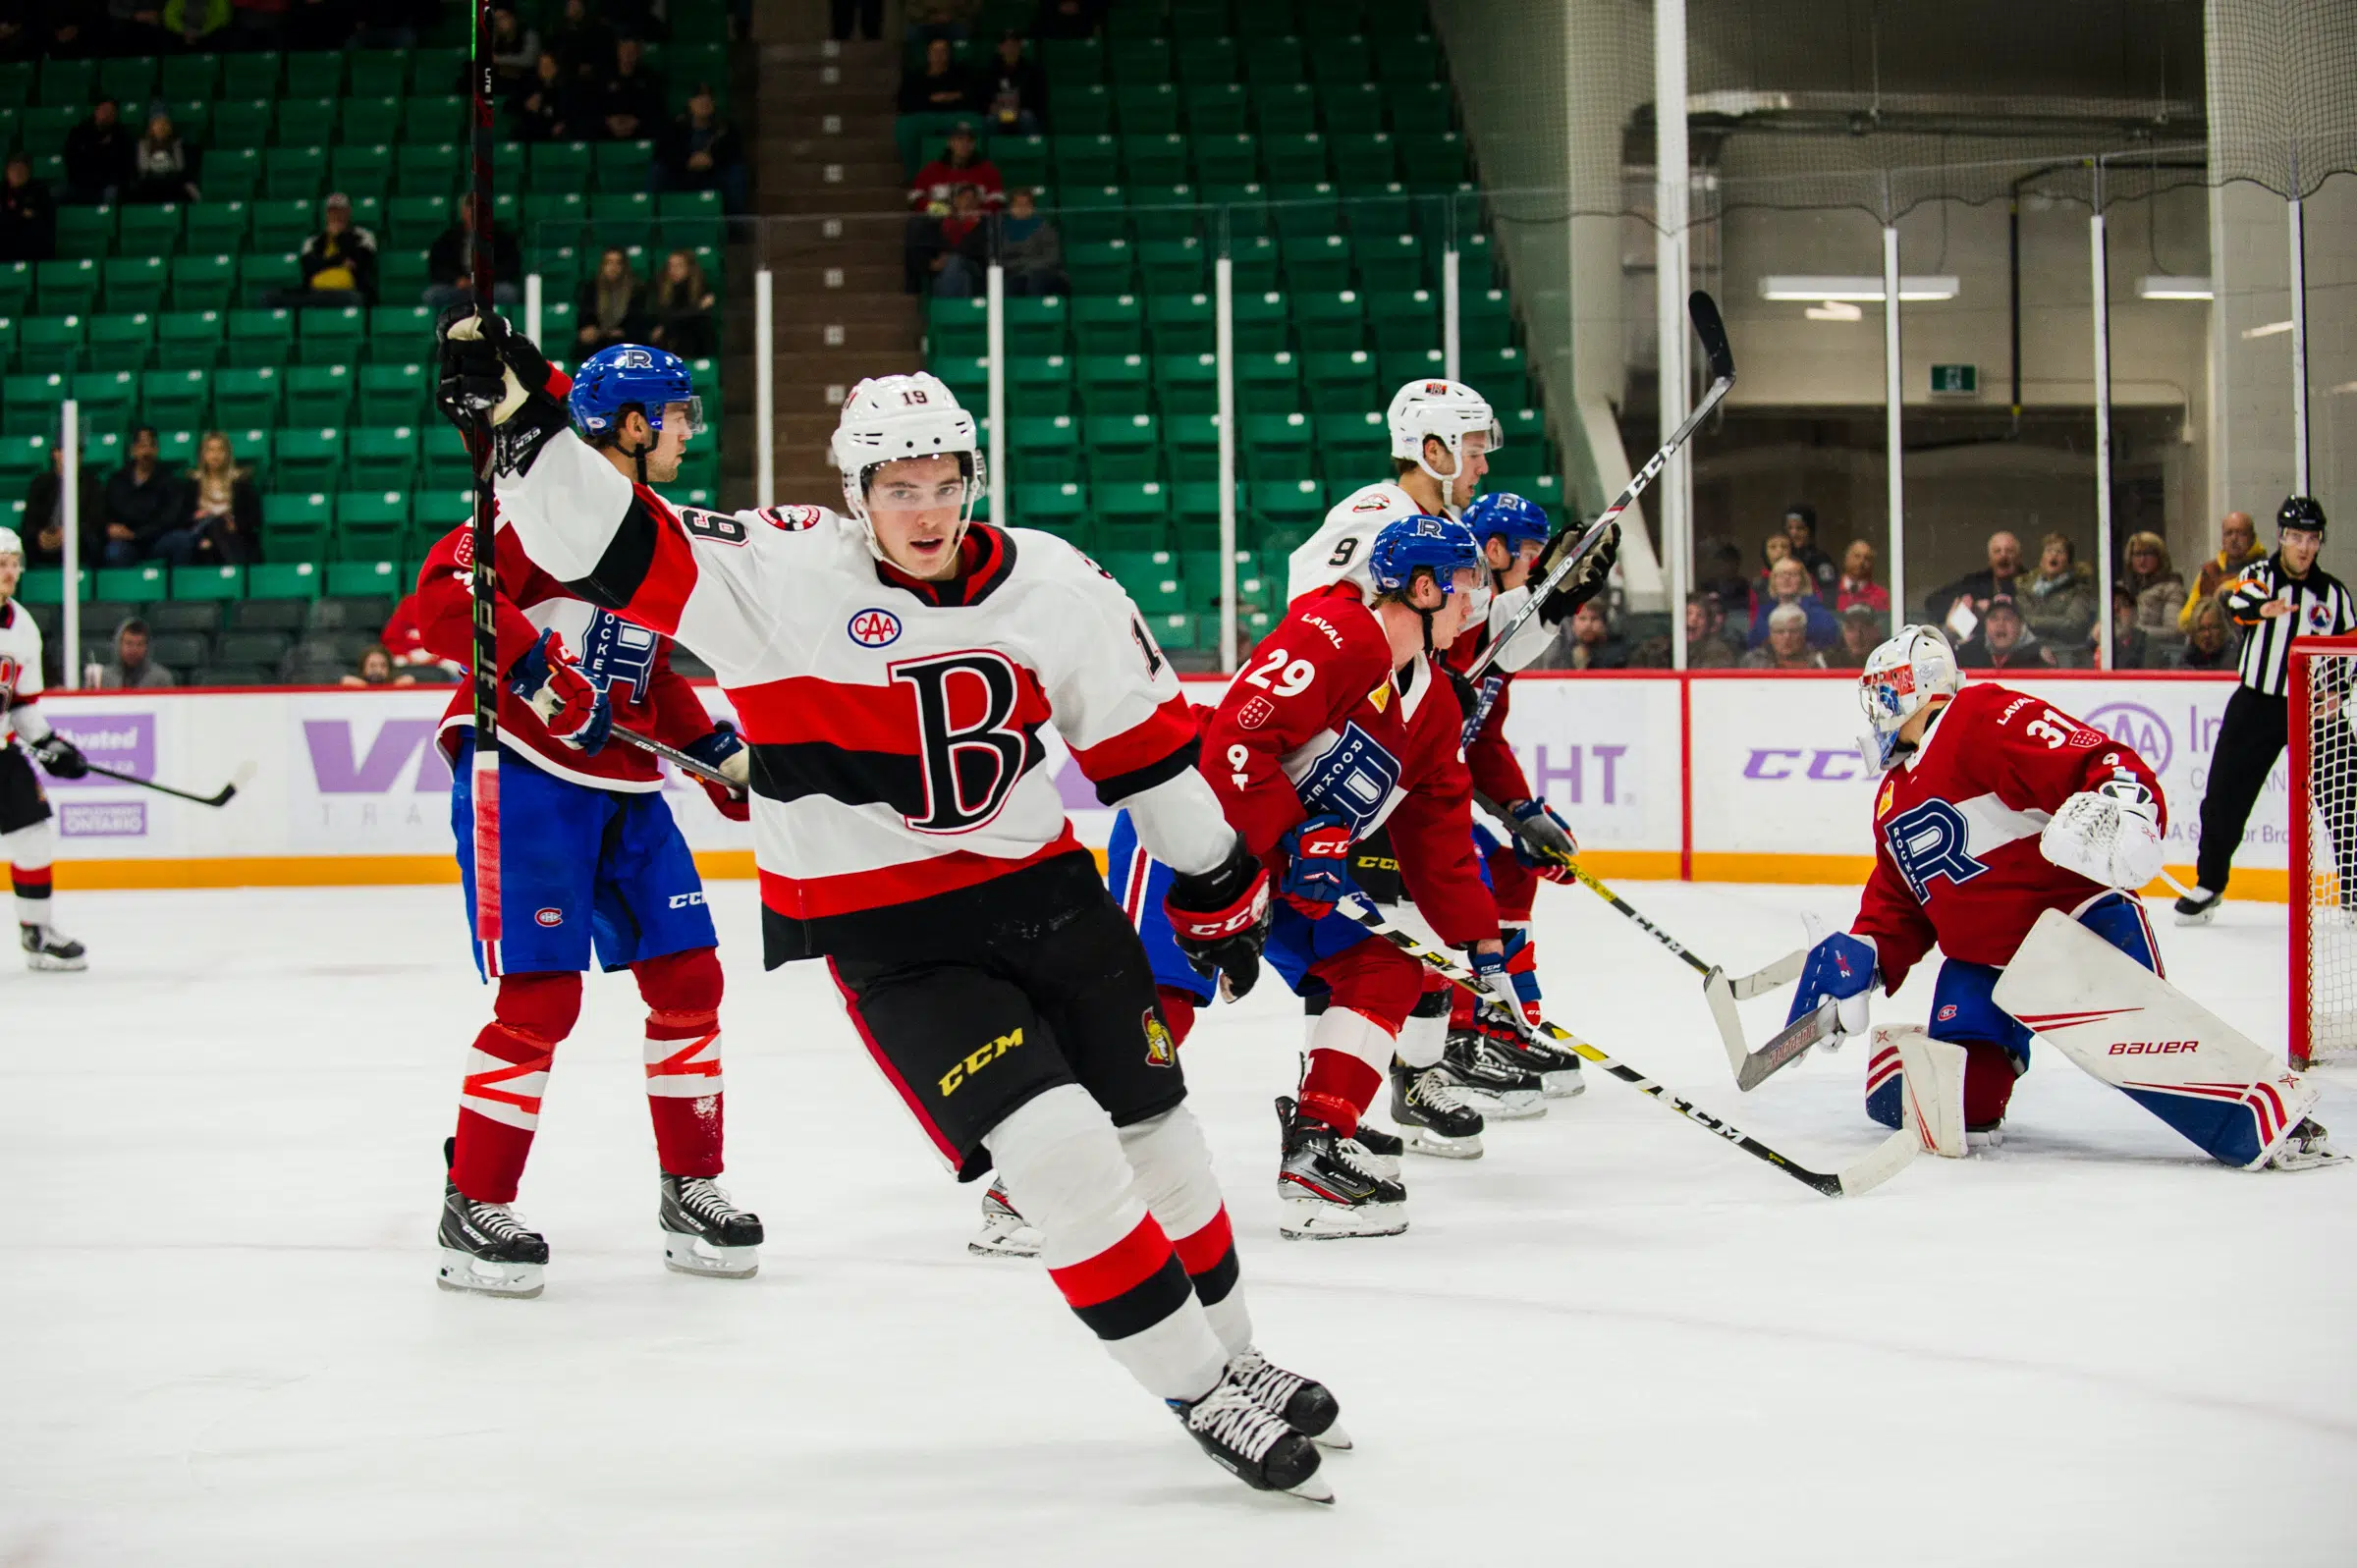 B-Sens stay perfect against Rocket with 5-3 victory